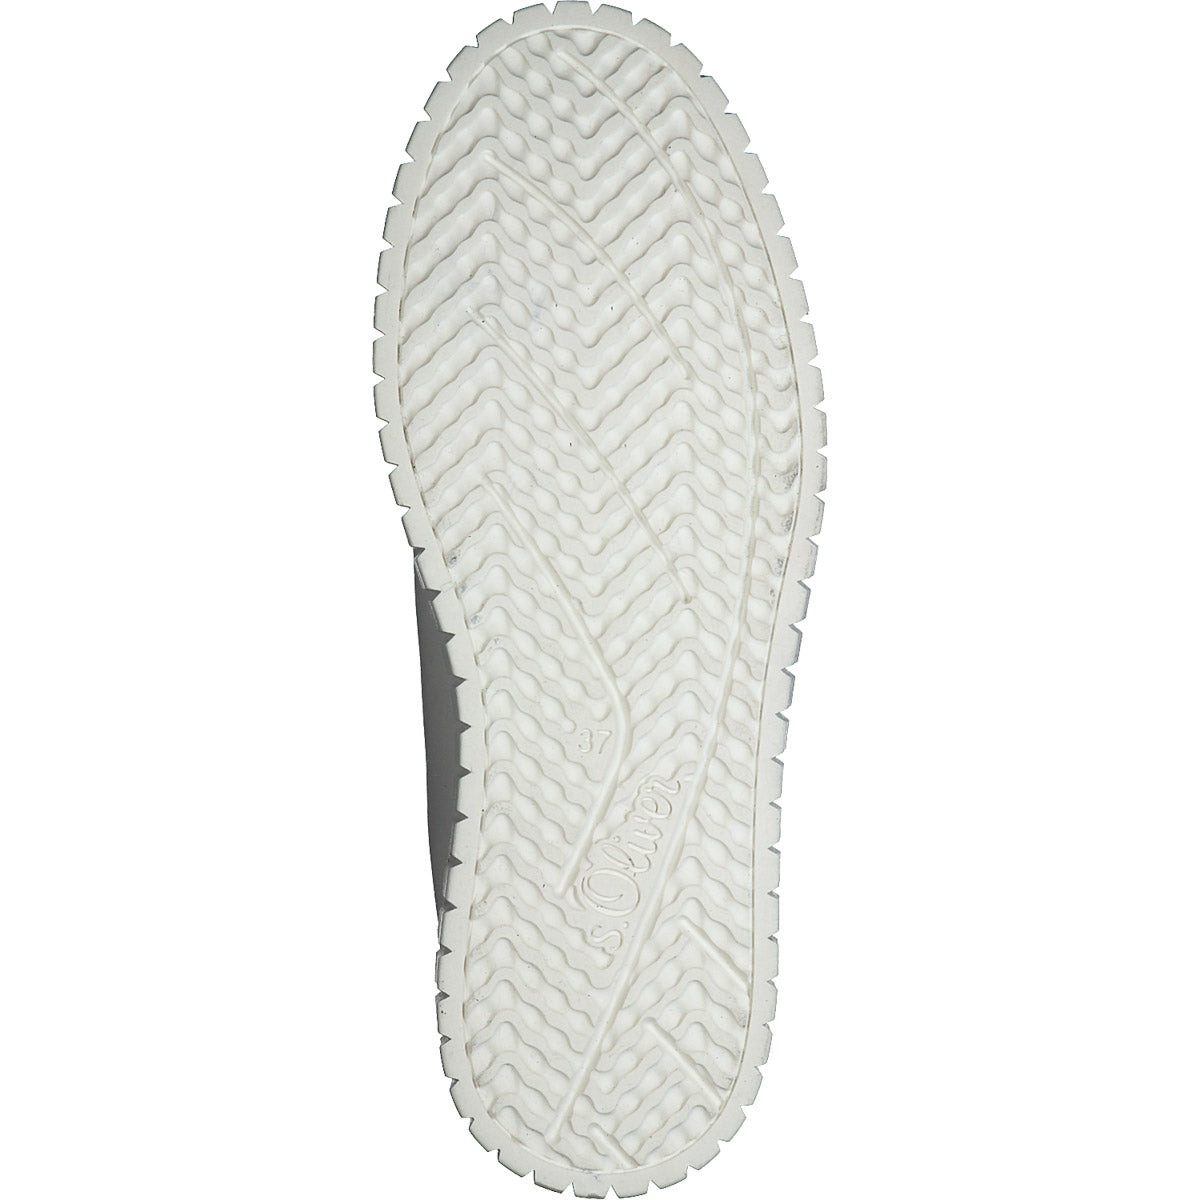 View of the seamless nude sole.